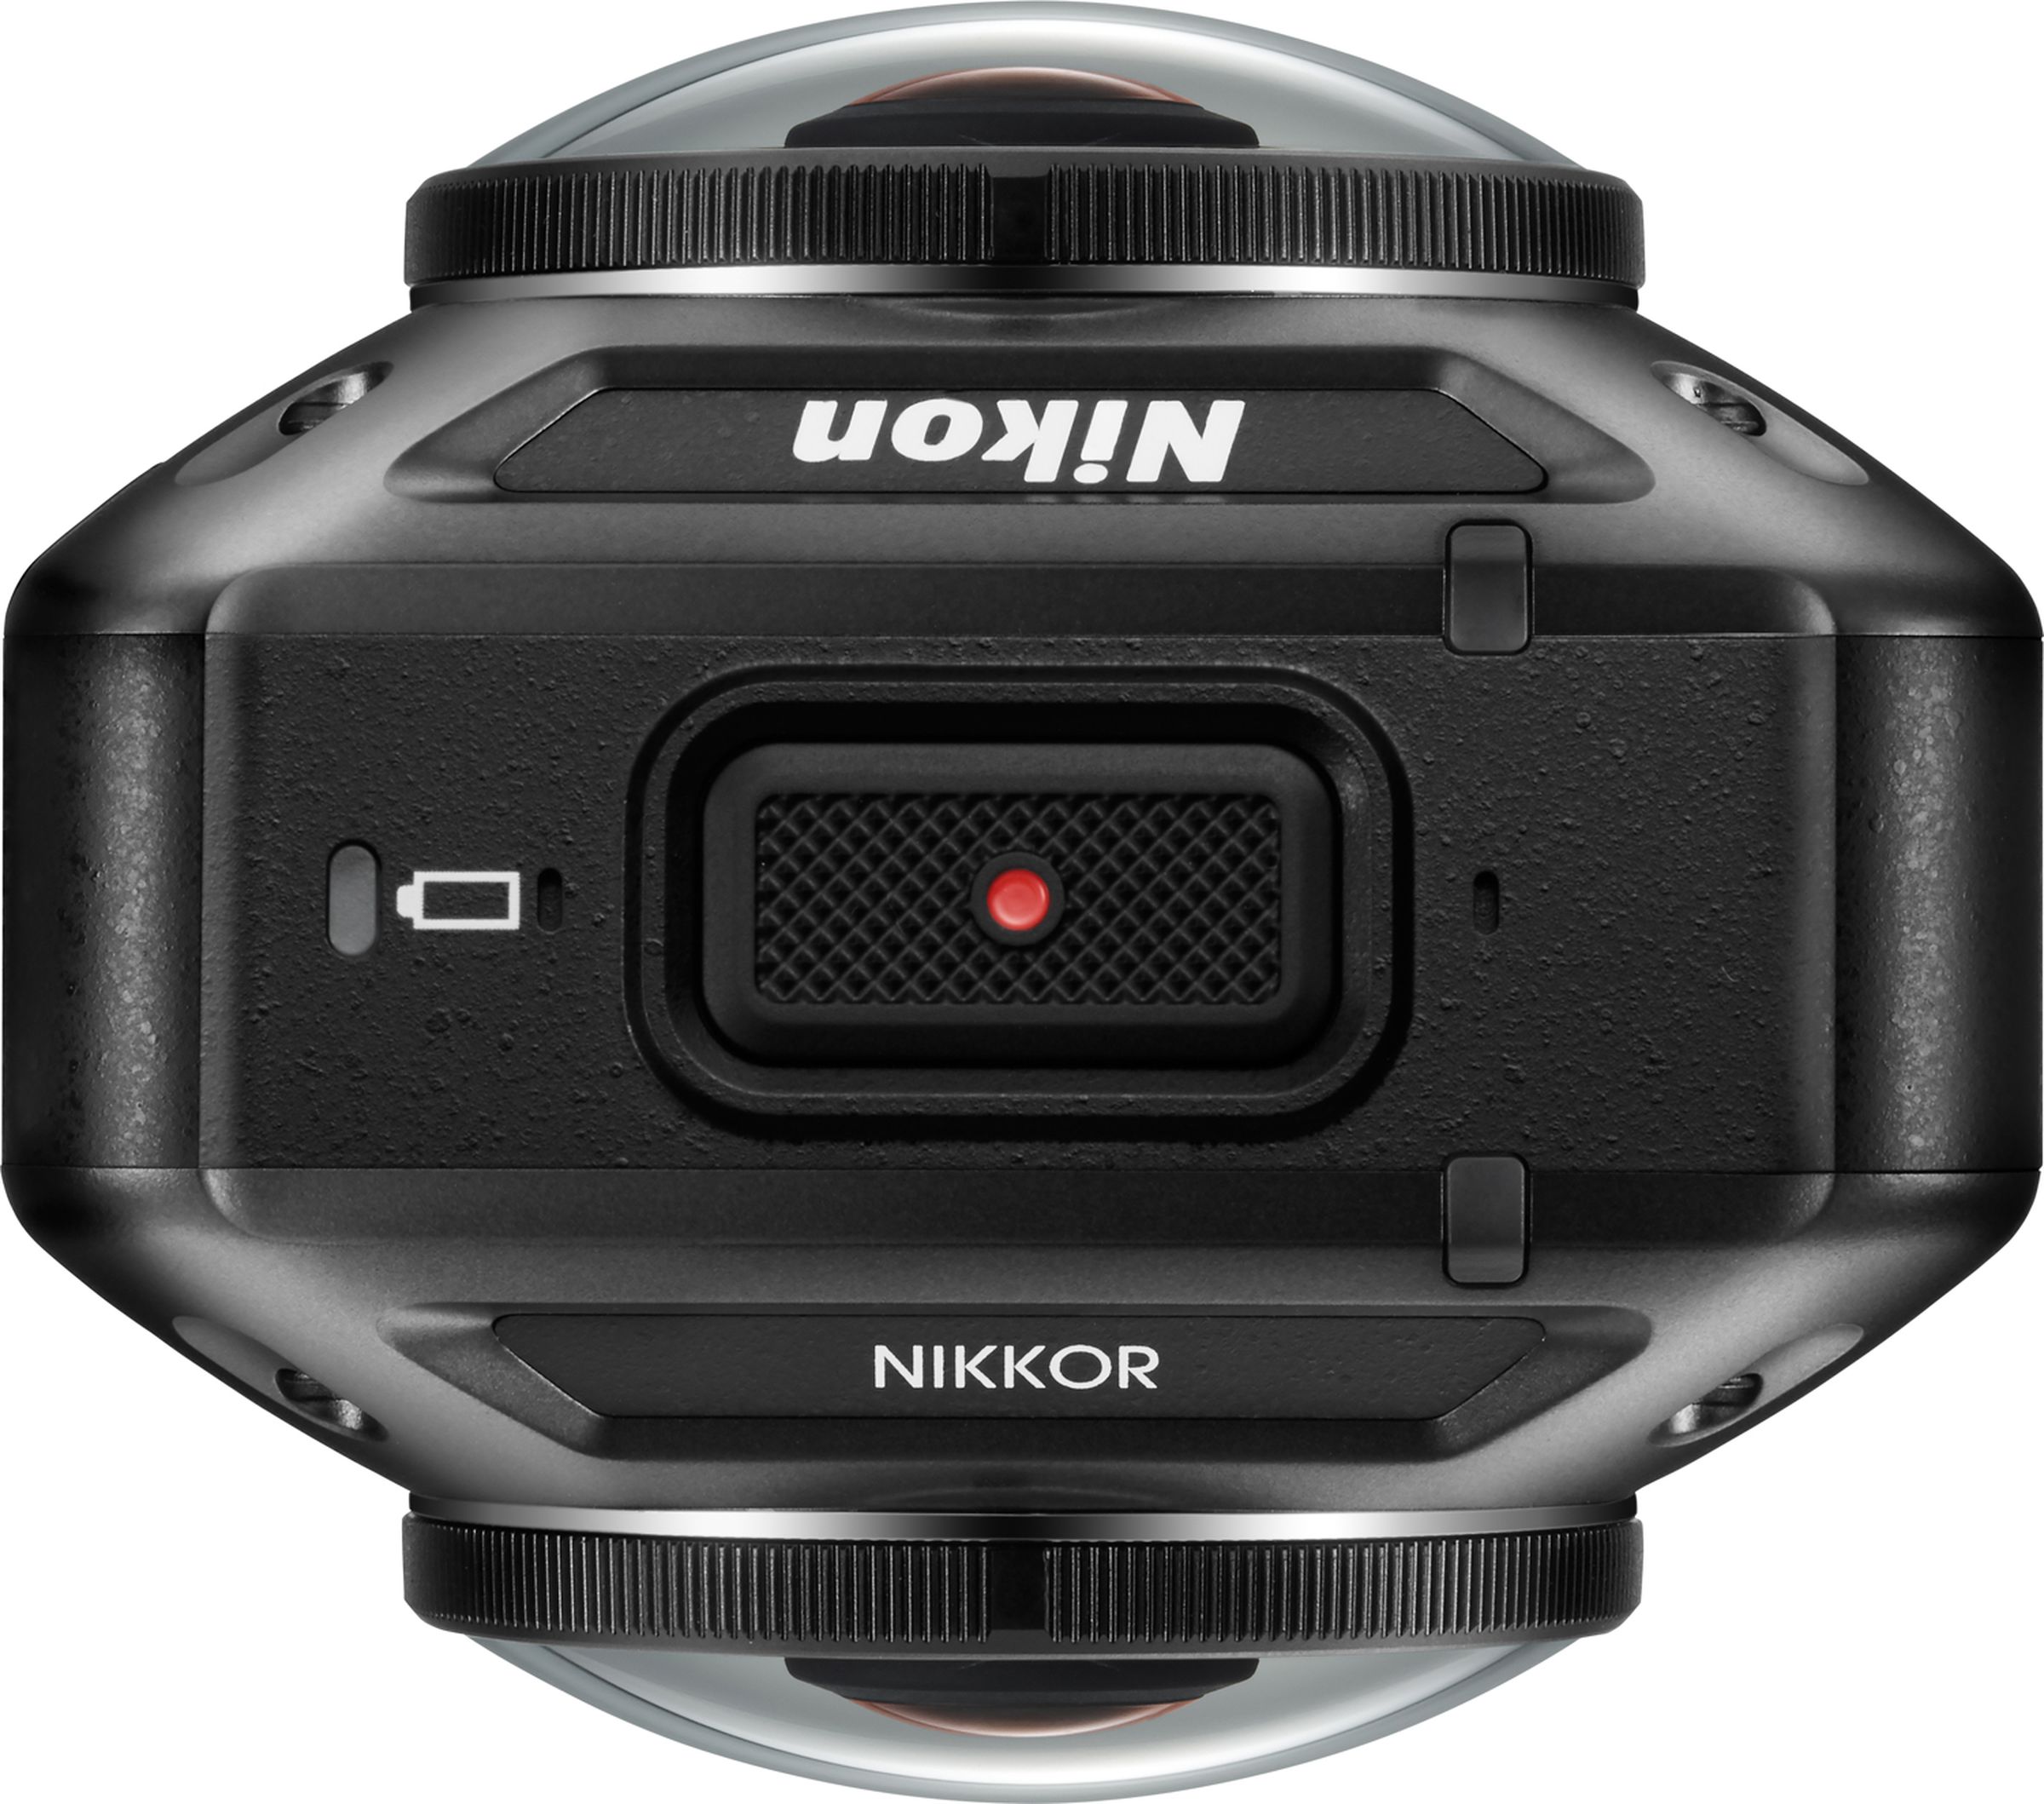 Nikon's KeyMission action cameras in photos